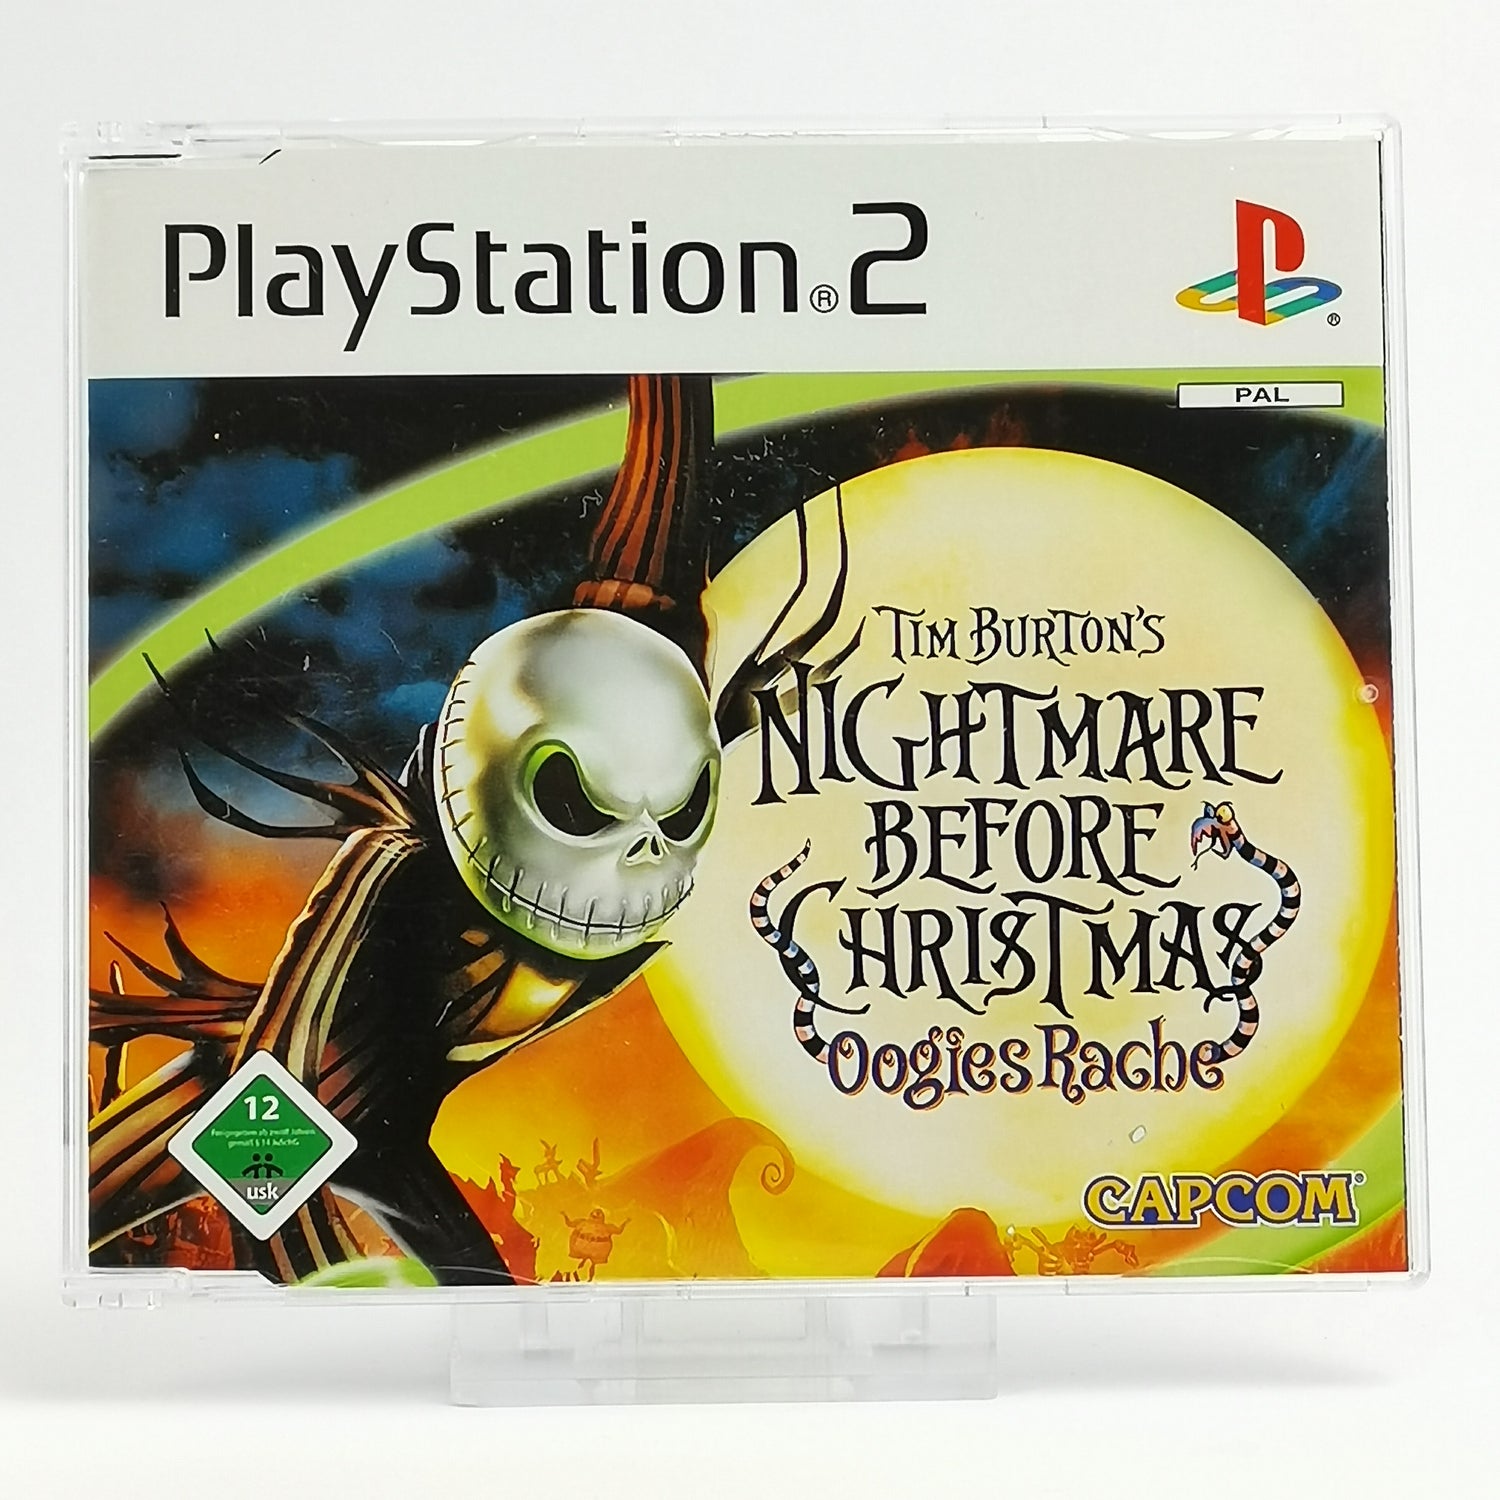 Sony Playstation 2 Promo Game: Nightmare Before Christmas Oogie's Revenge - PS2